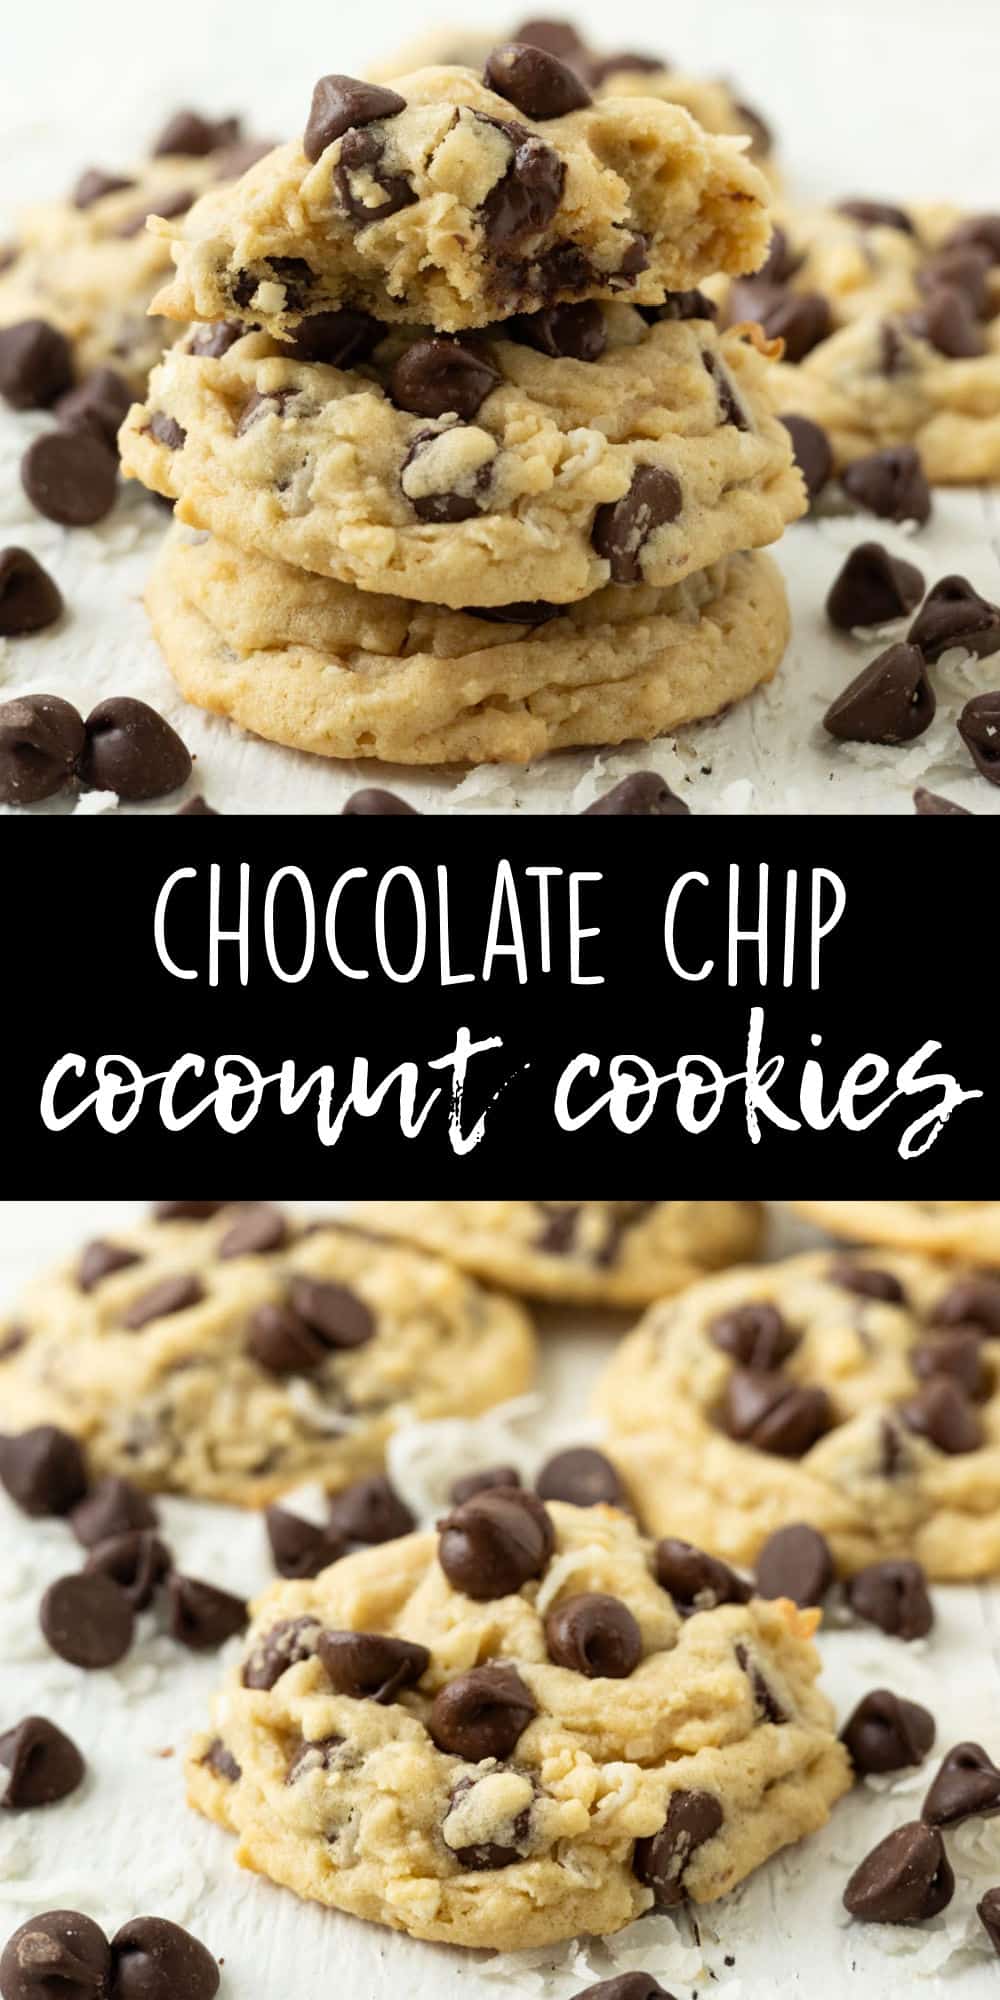 Chewy Chocolate Chip Coconut Cookies Recipe - Pitchfork Foodie Farms